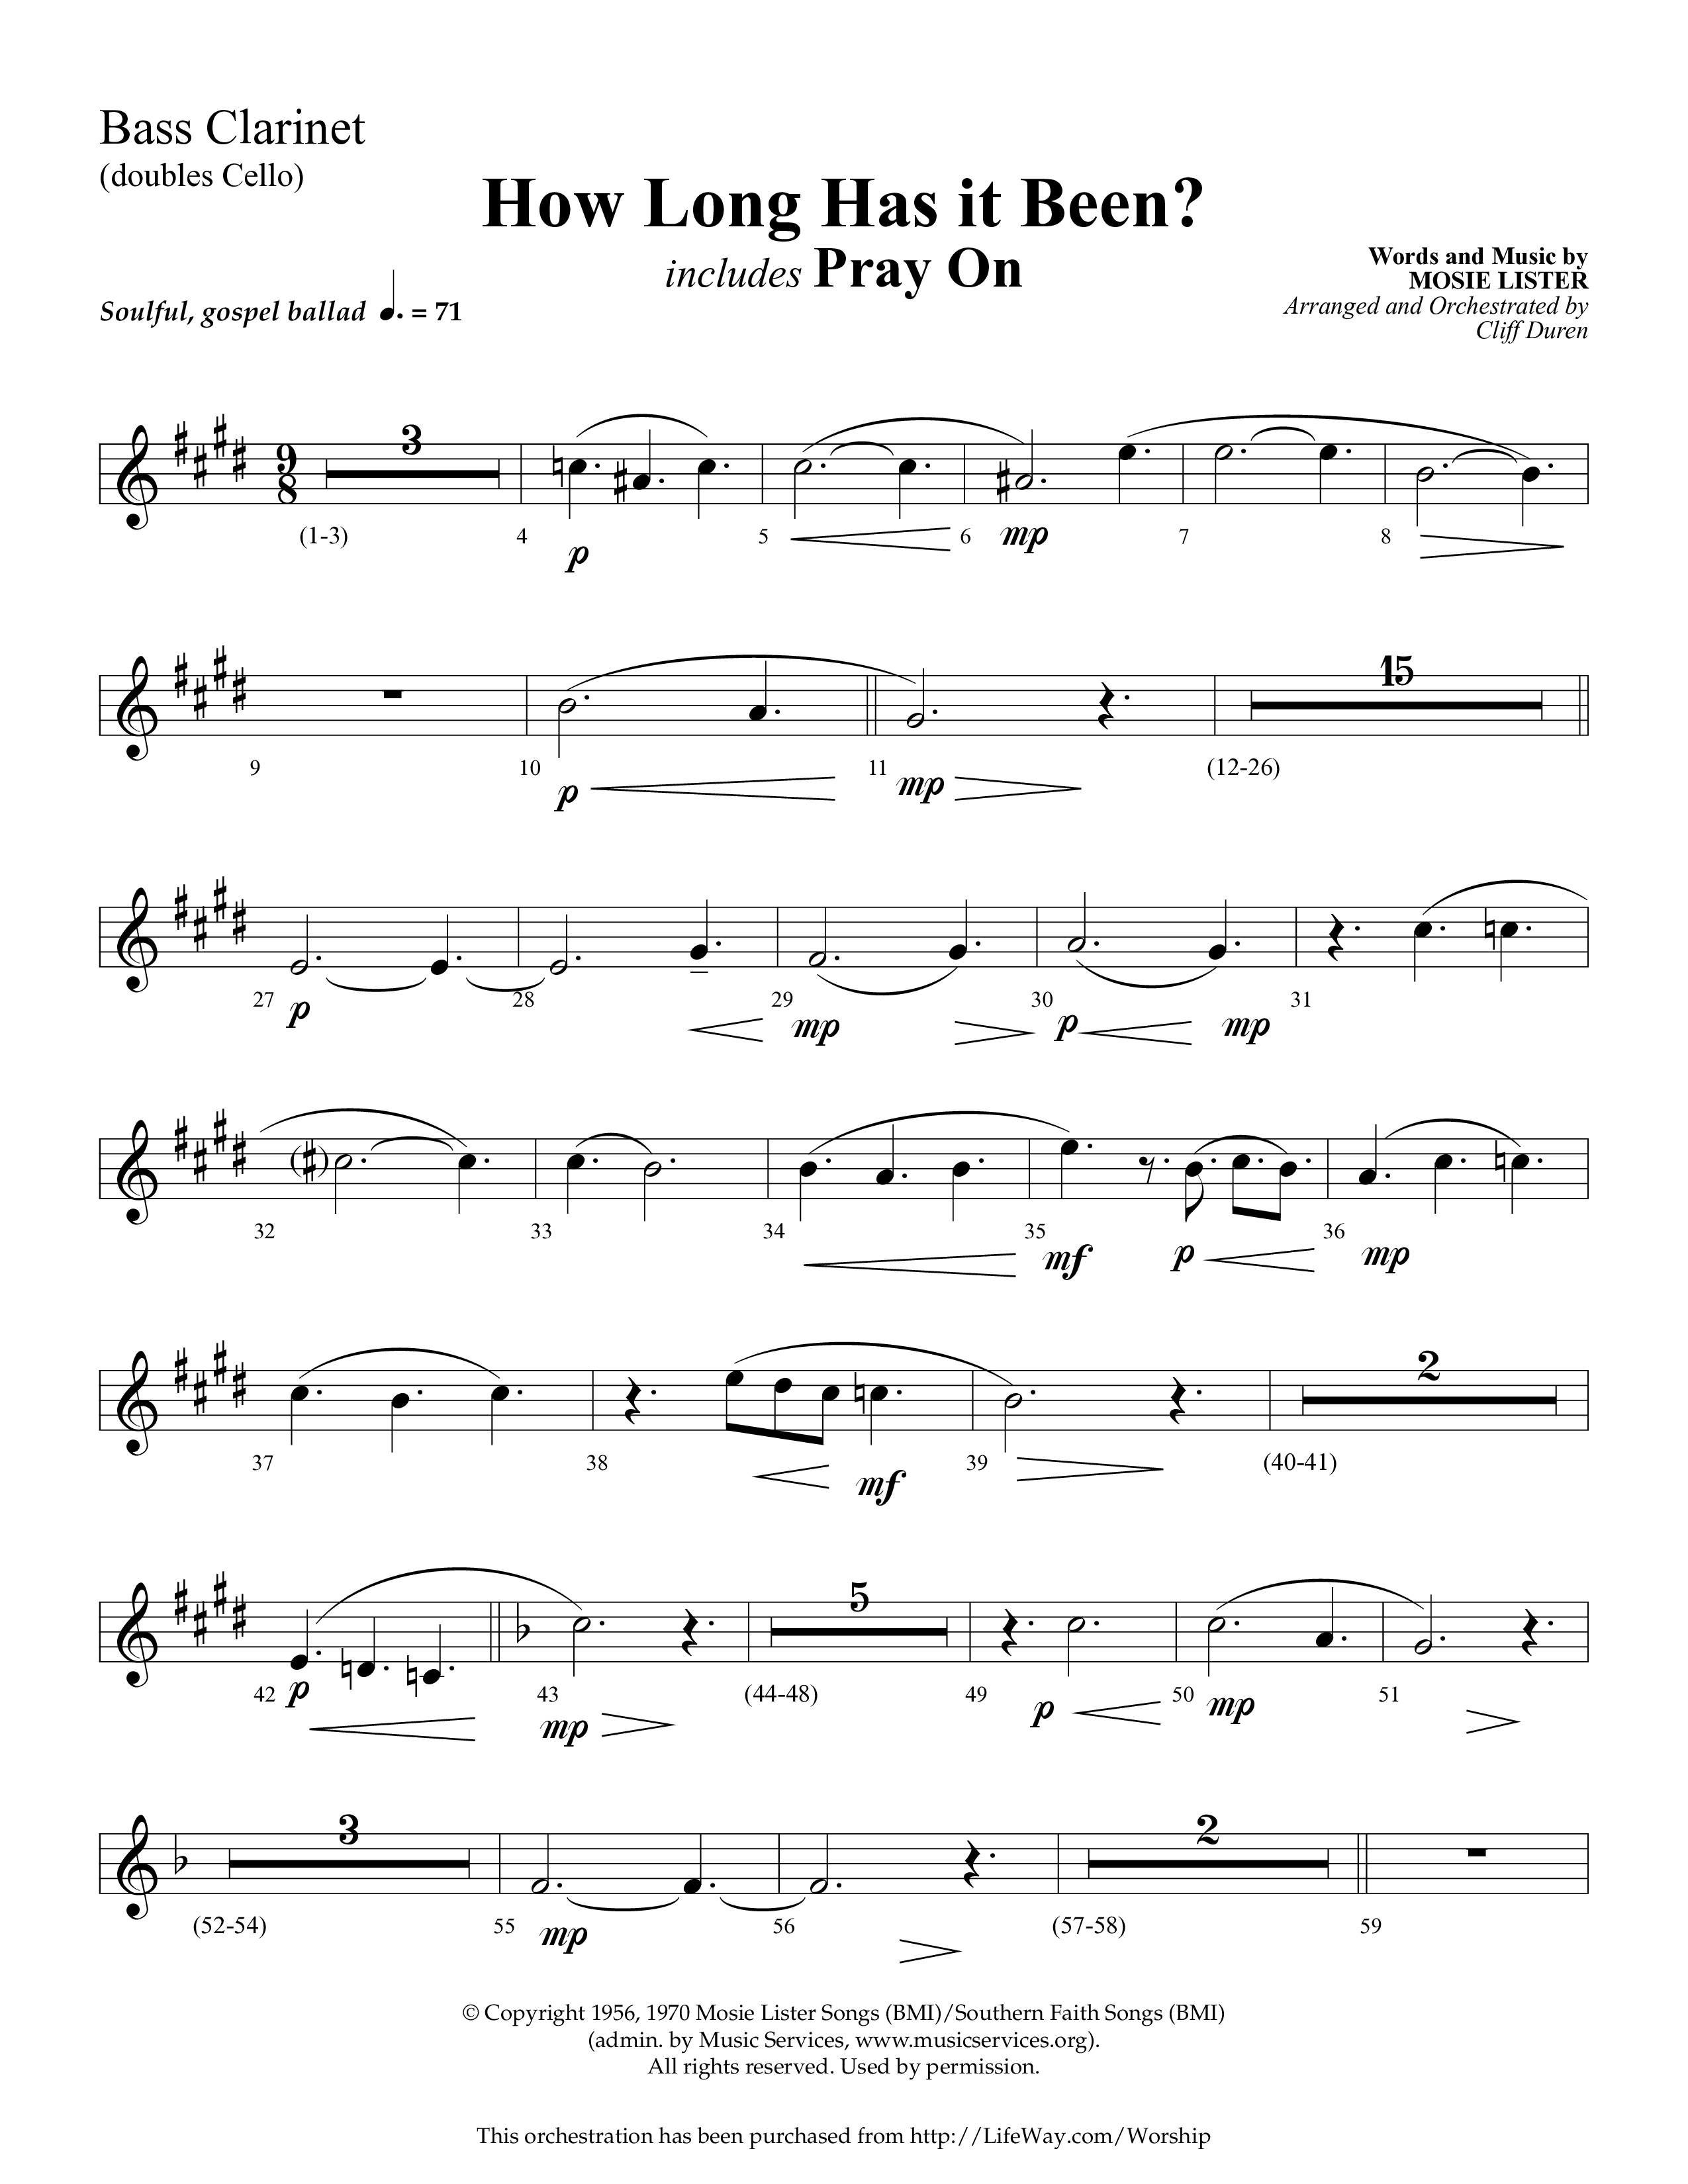 How Long Has It Been (with Pray On) (Choral Anthem SATB) Bass Clarinet (Lifeway Choral / Arr. Cliff Duren)